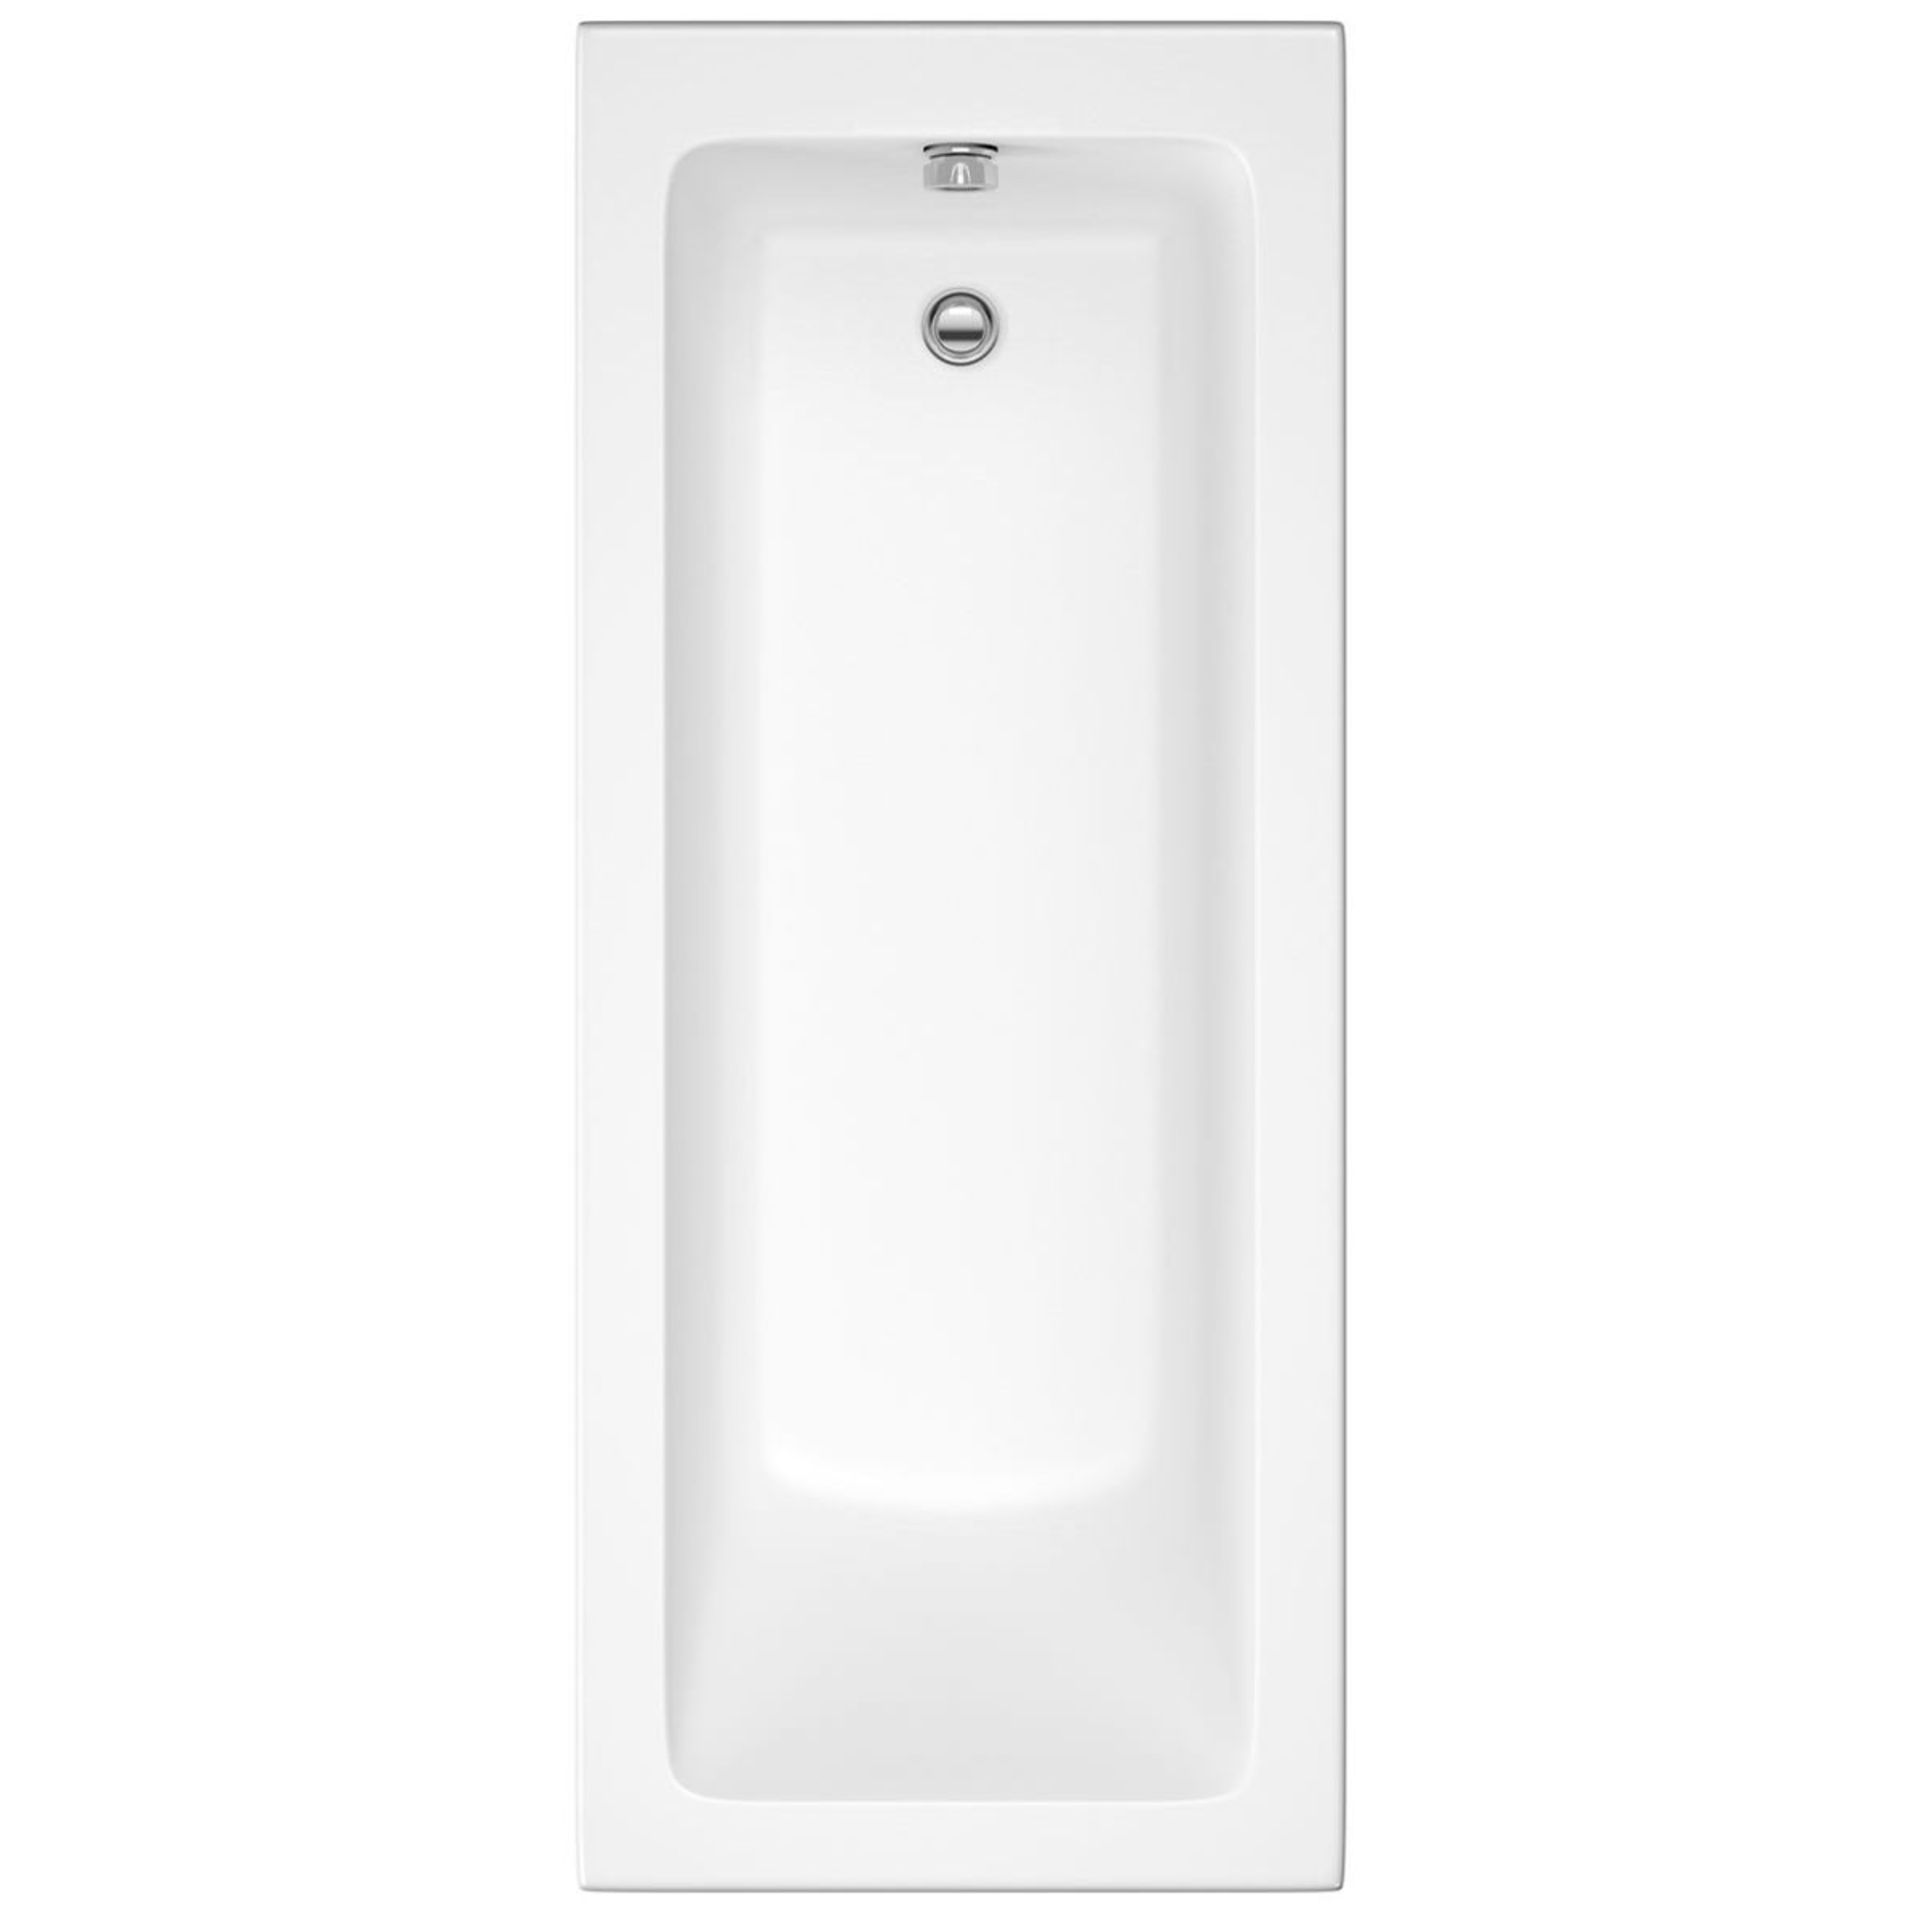 New (E8) 1800x800mm Solarna Single Ended Bath, No Taphole. RRP £472.99.The Superbly Designed ... - Image 2 of 2